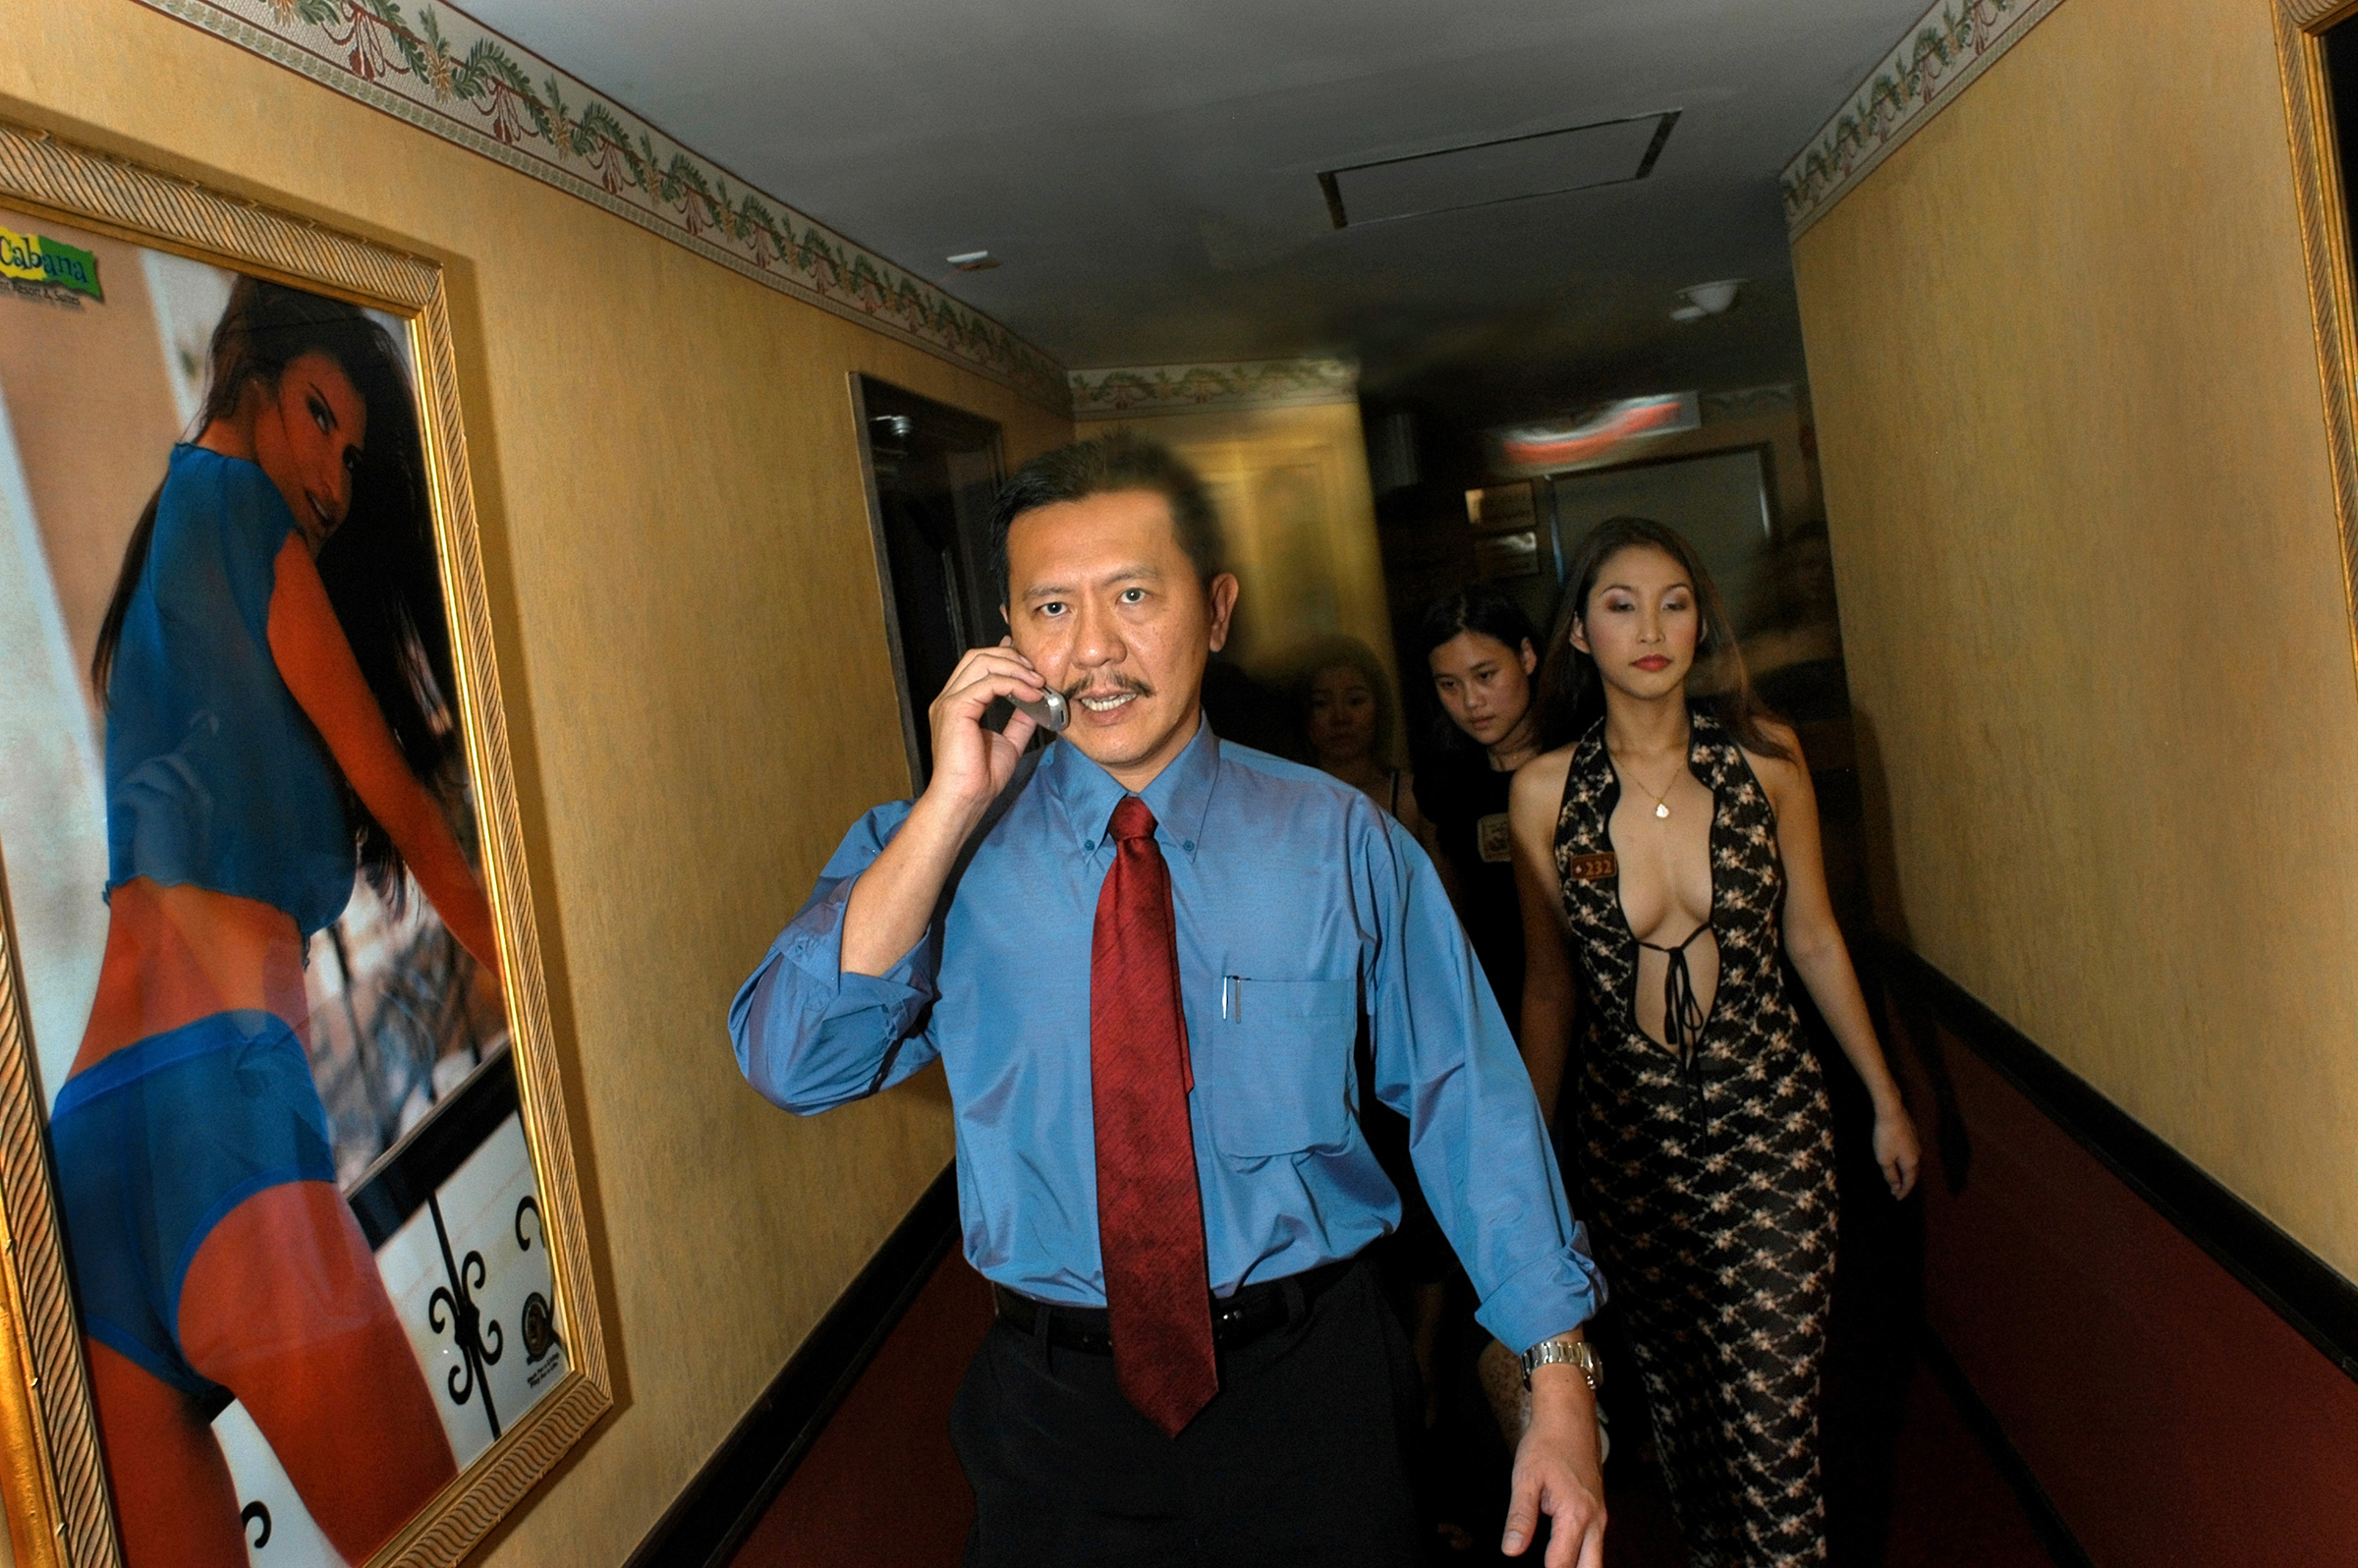 Chuwit Kamolvisit, then 42, talks on his mobile phone as he walks down the corridor of the Copacabana, one of his Bangkok establishments, on Oct. 2, 2003.